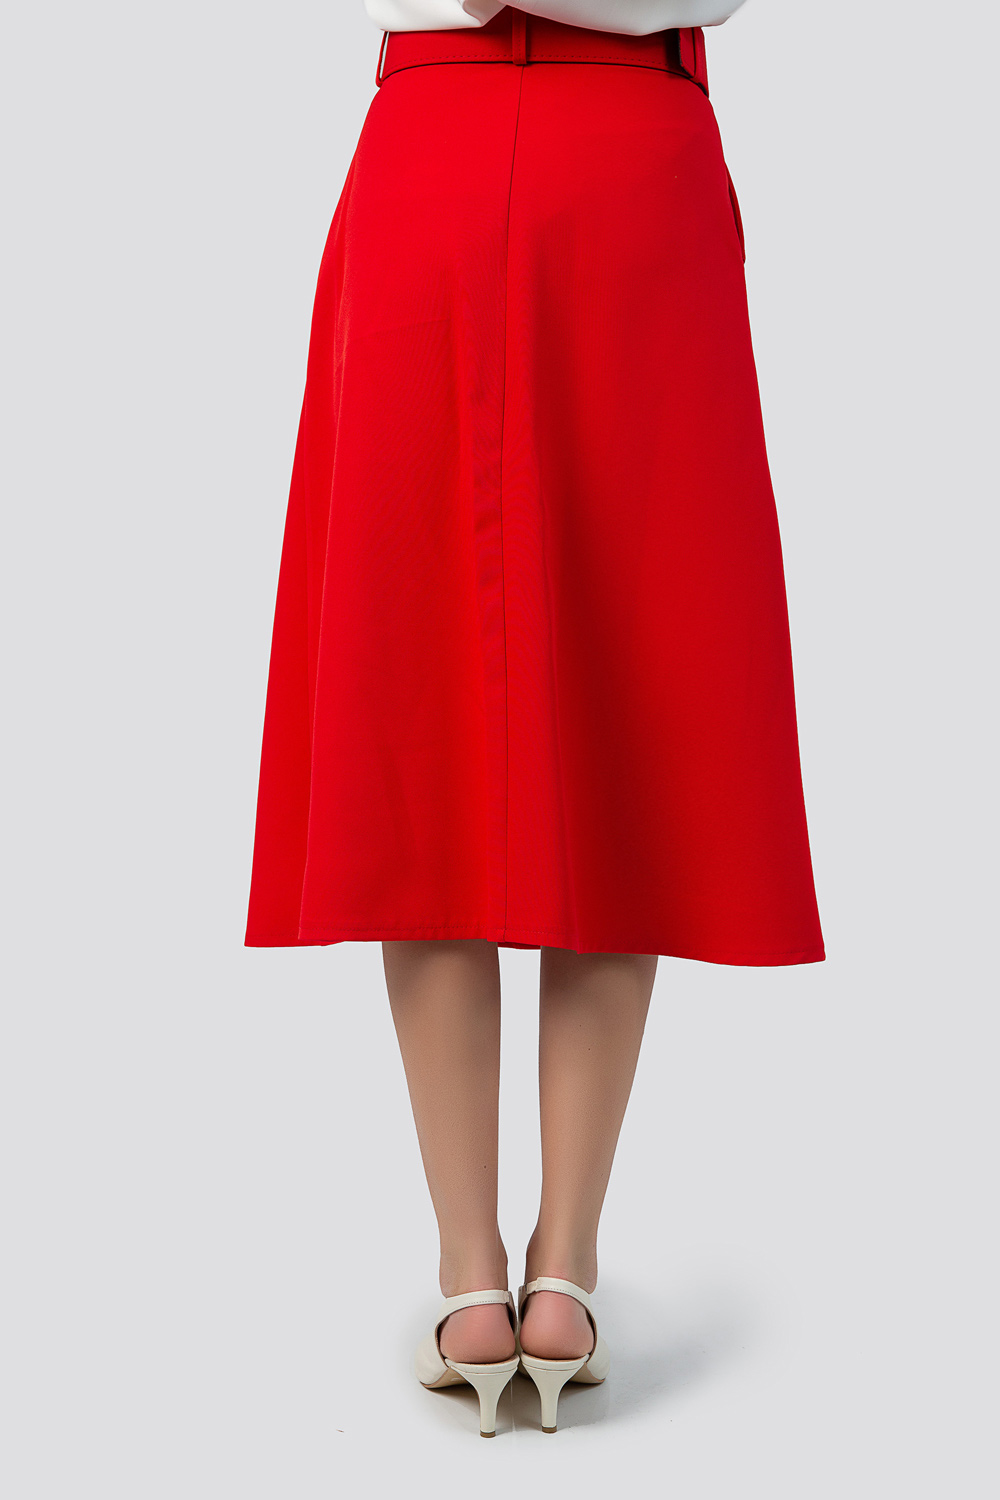 Flared red skirt with a belt